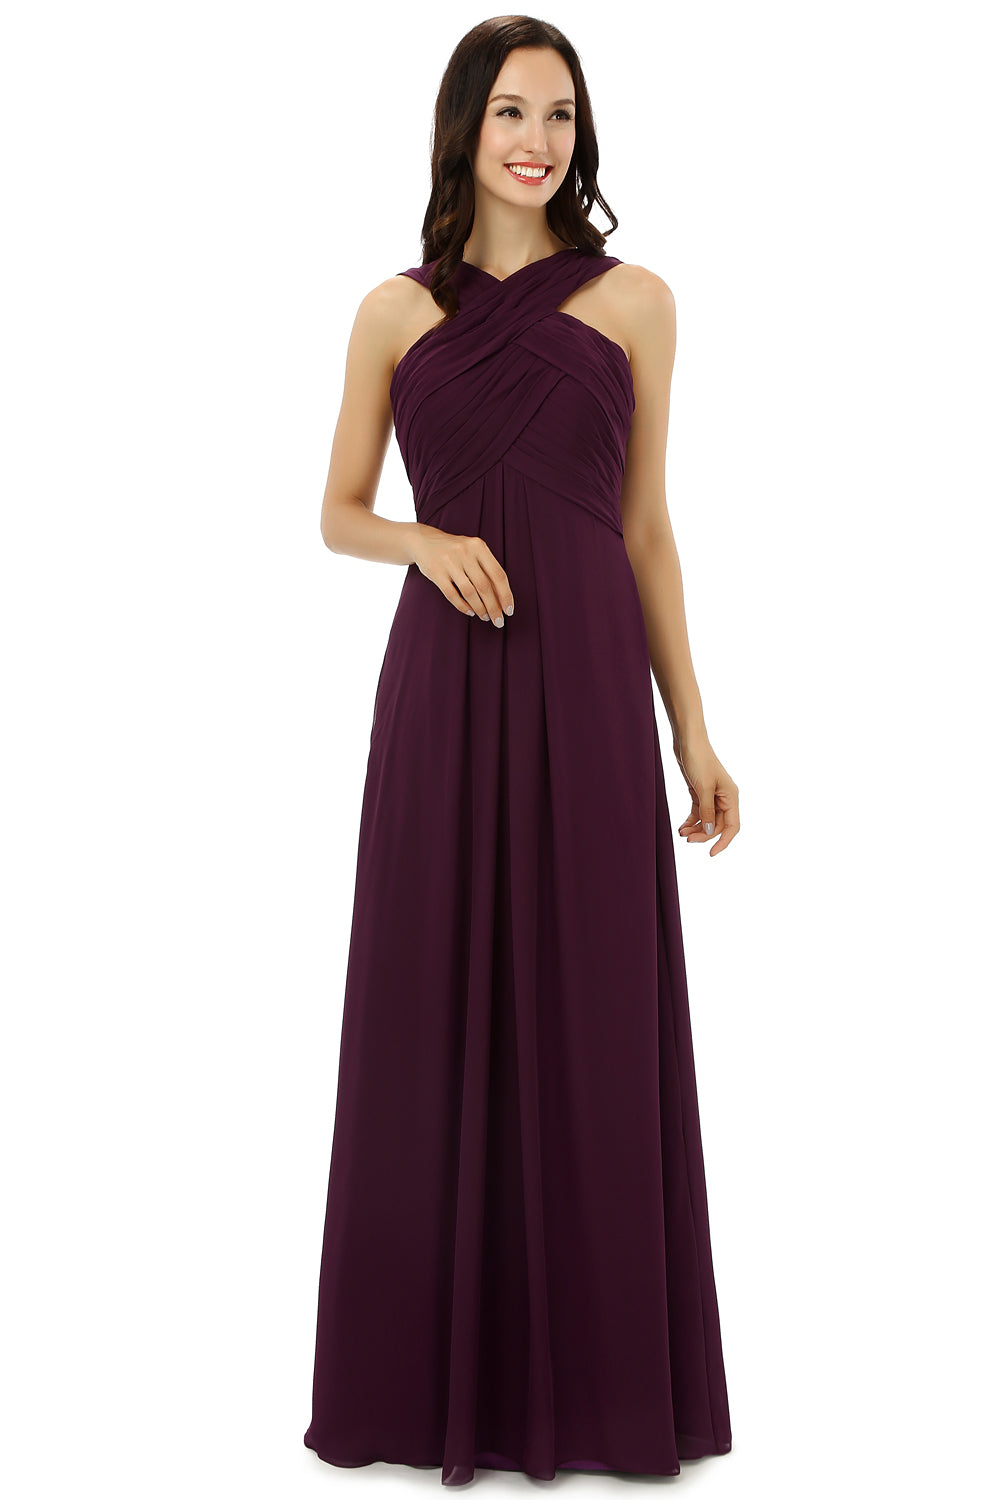 Chiffon Purple Halter Long Corset Bridesmaid Dresses outfit, Party Dress Renswoude